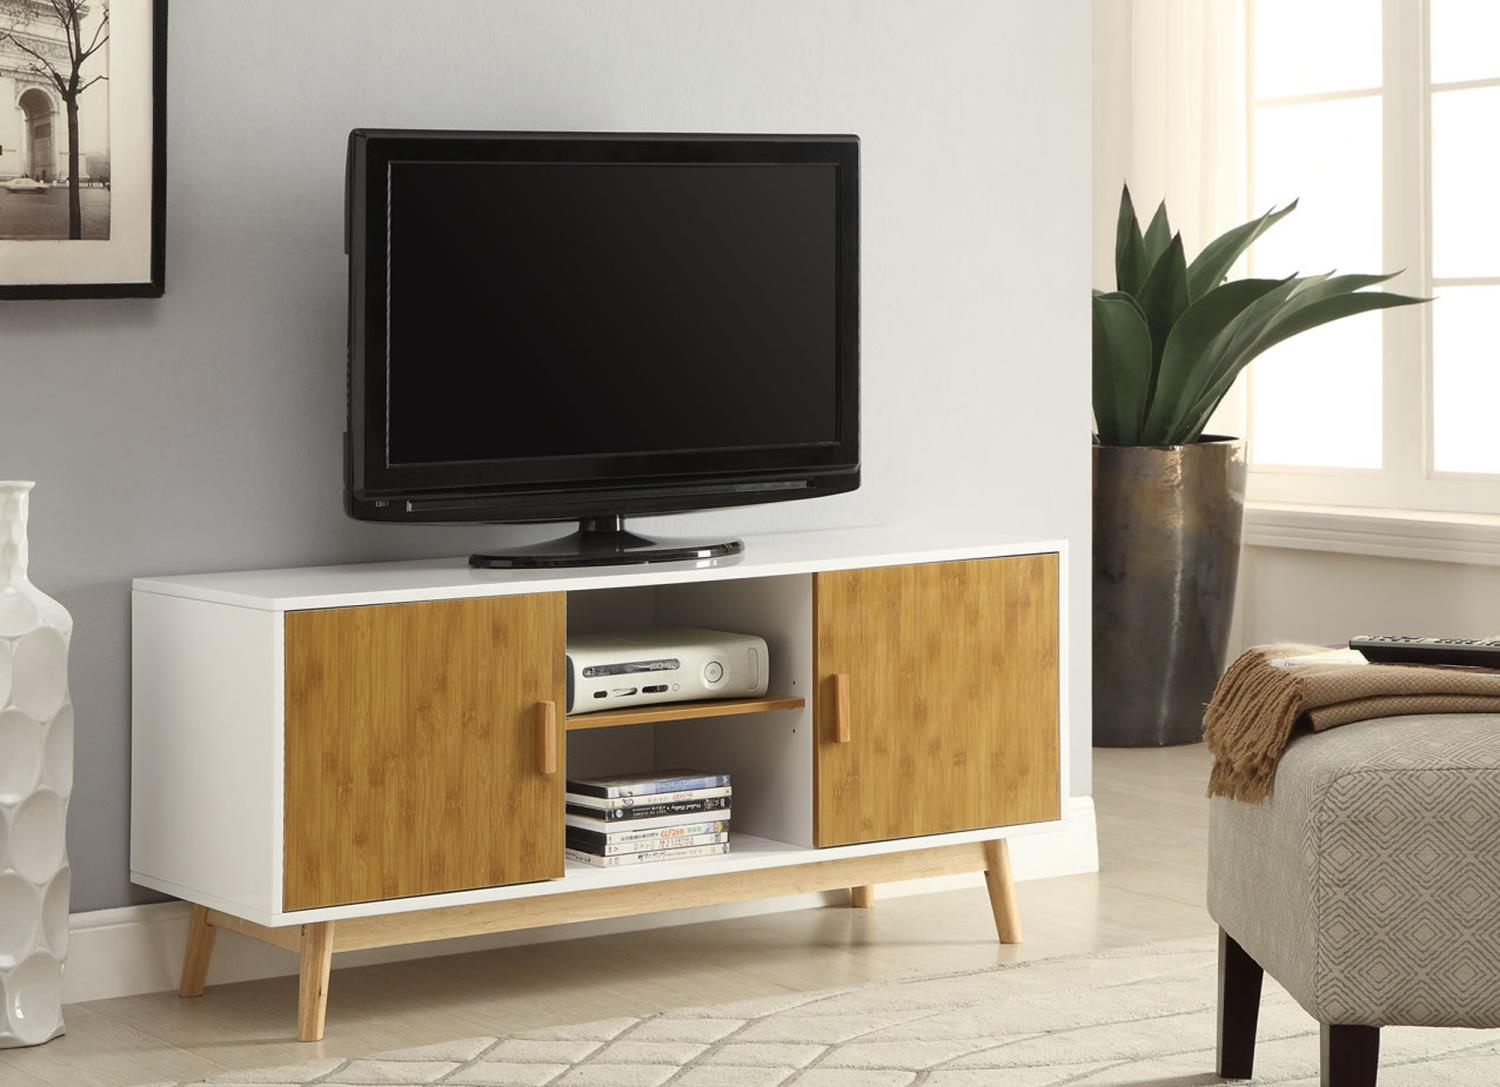 Convenience Concepts Oslo TV Stand with Storage Cabinets and Shelves S20-114